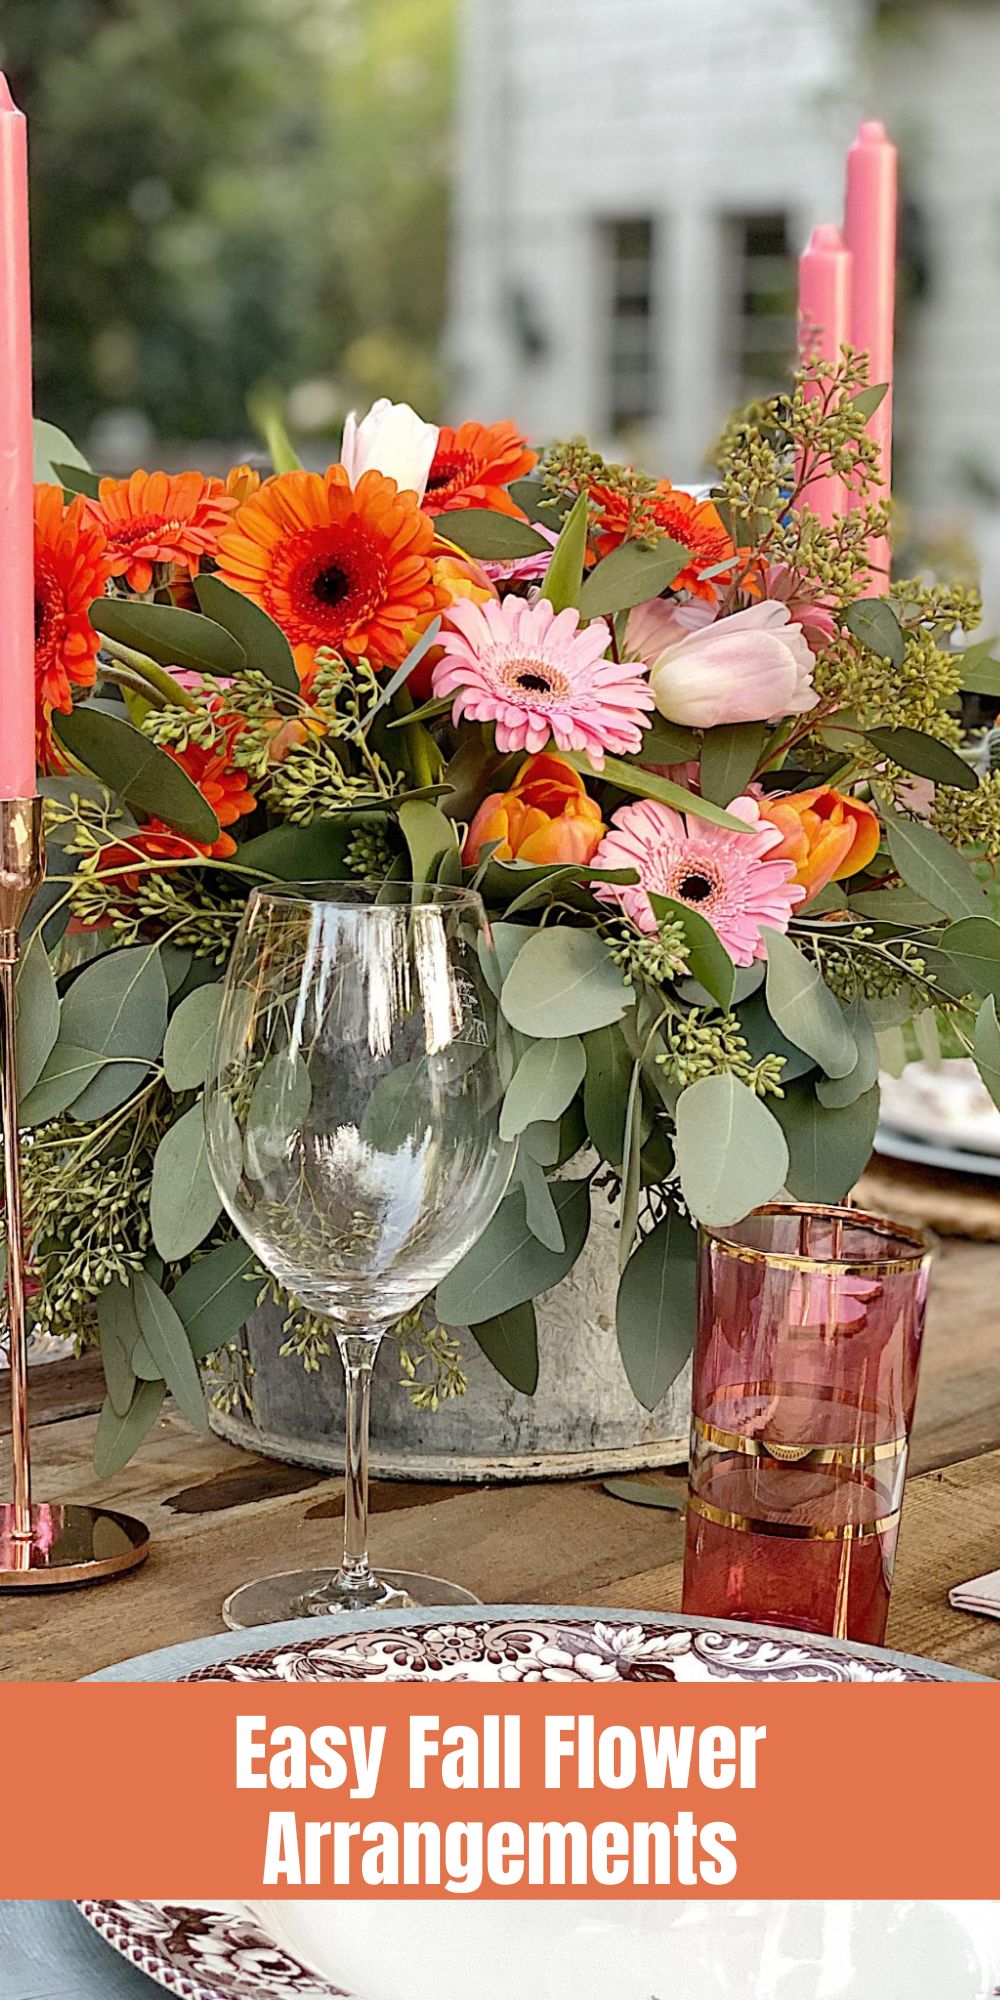 Today I am sharing one of my favorite fall flower arrangements. I used grocery store flowers to create this wonderful setting.